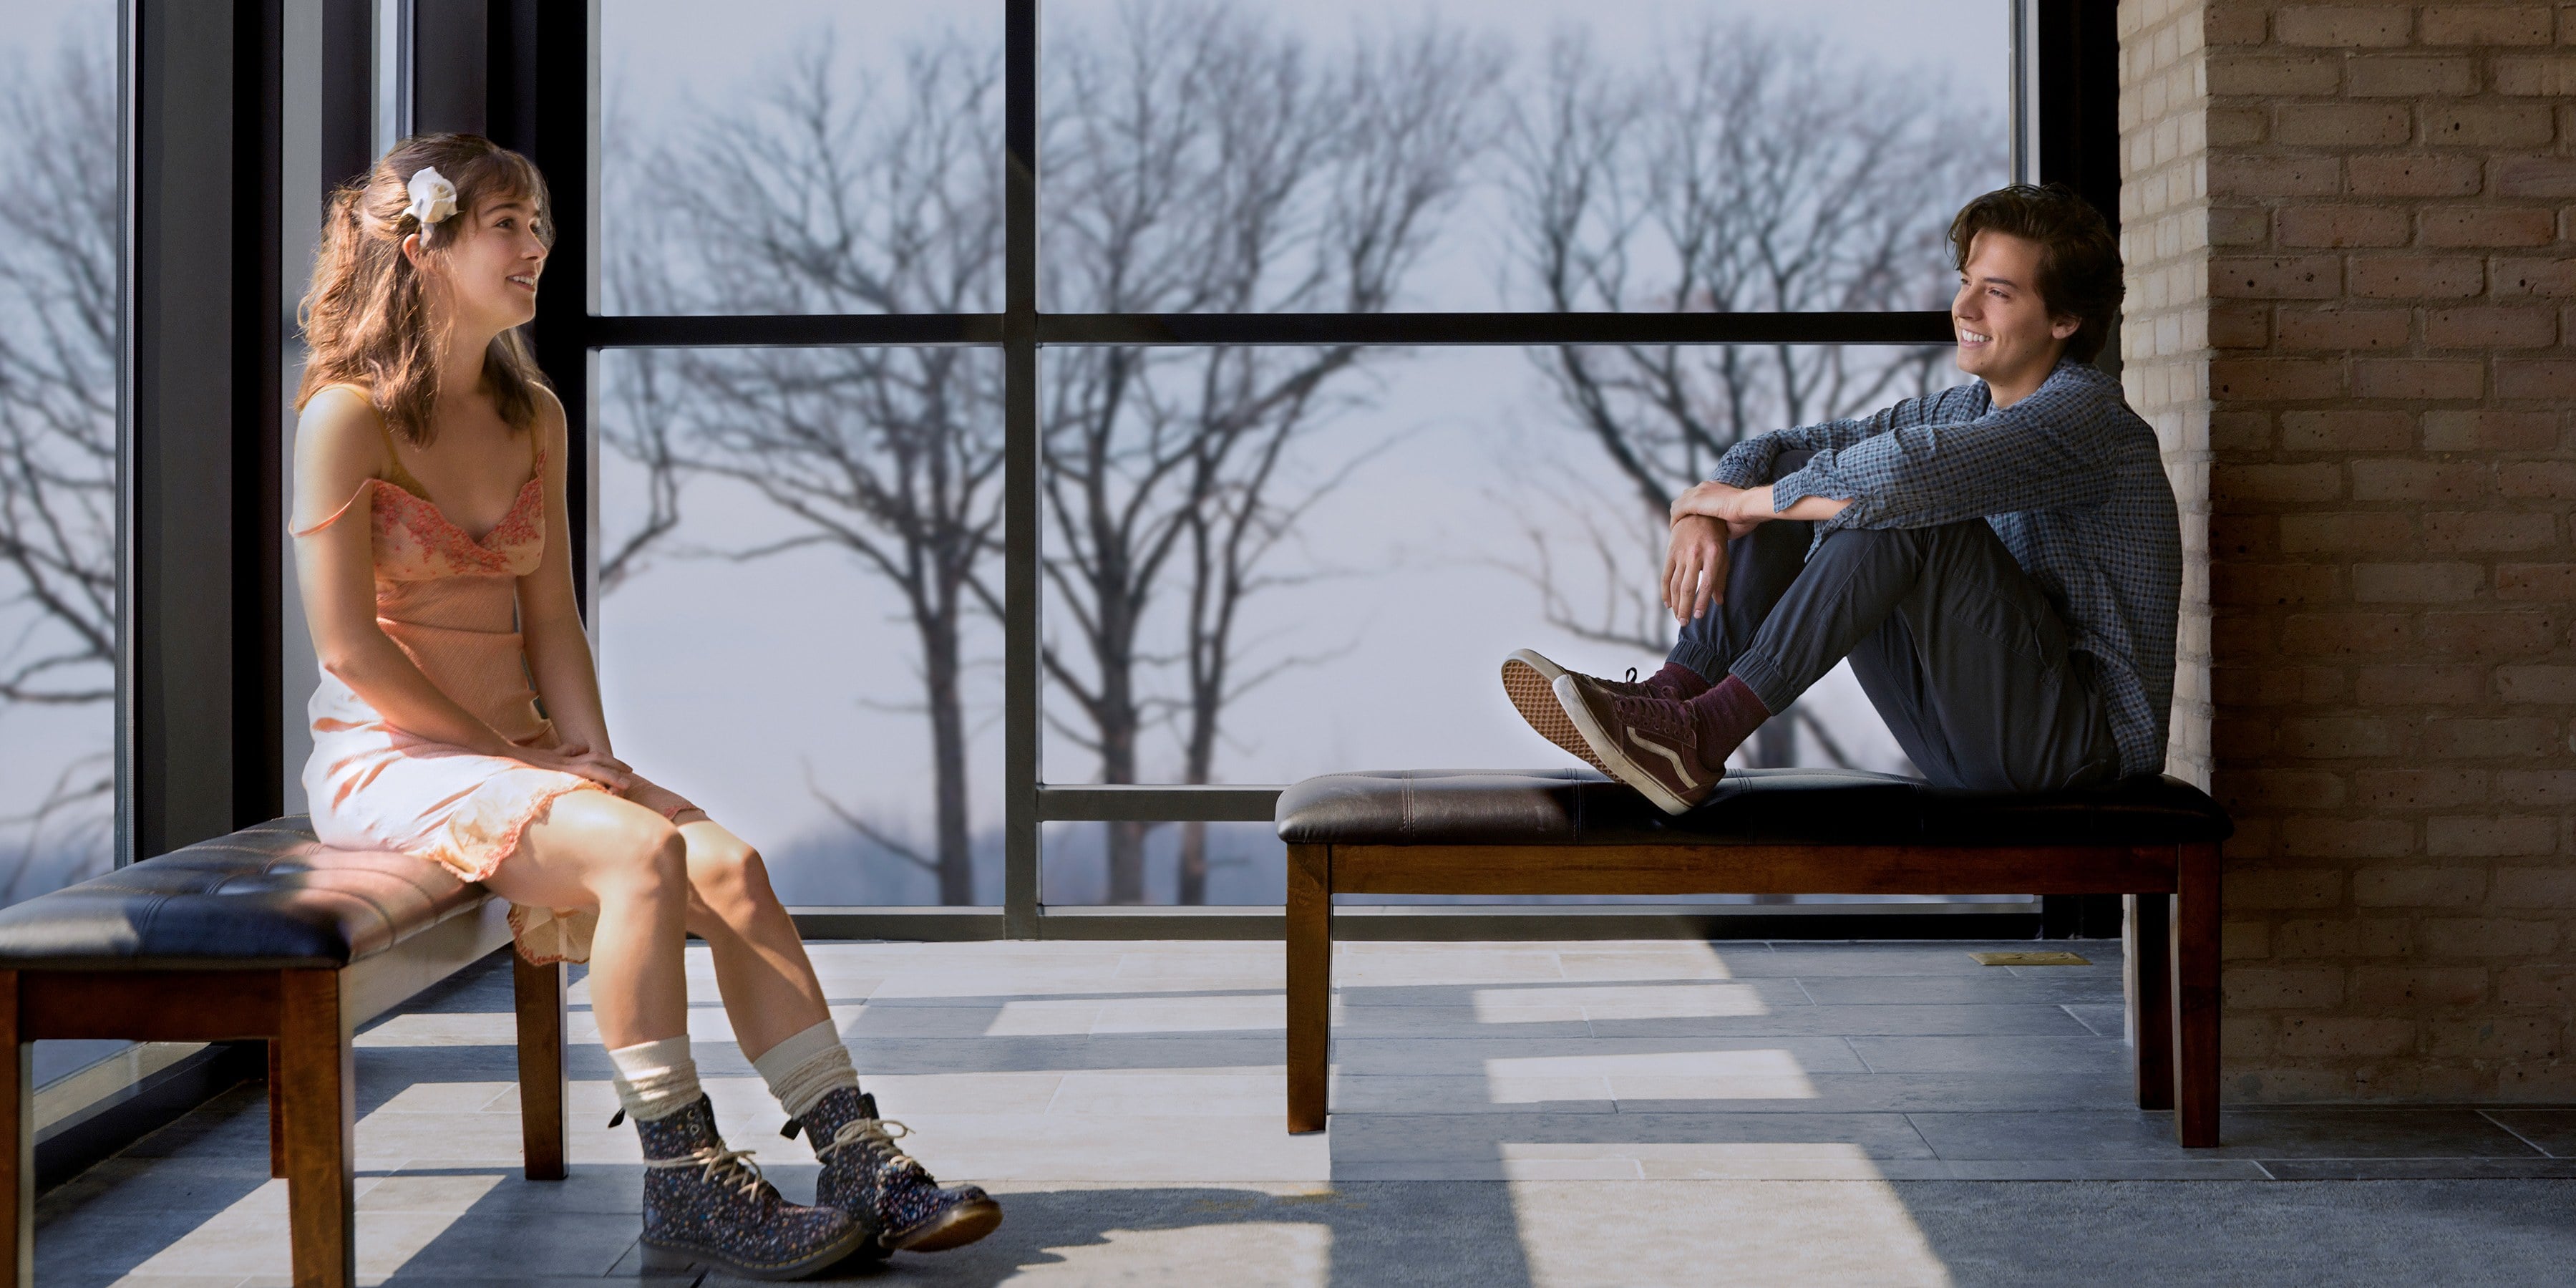 Five Feet Apart' pairs teen romance with cystic fibrosis in new